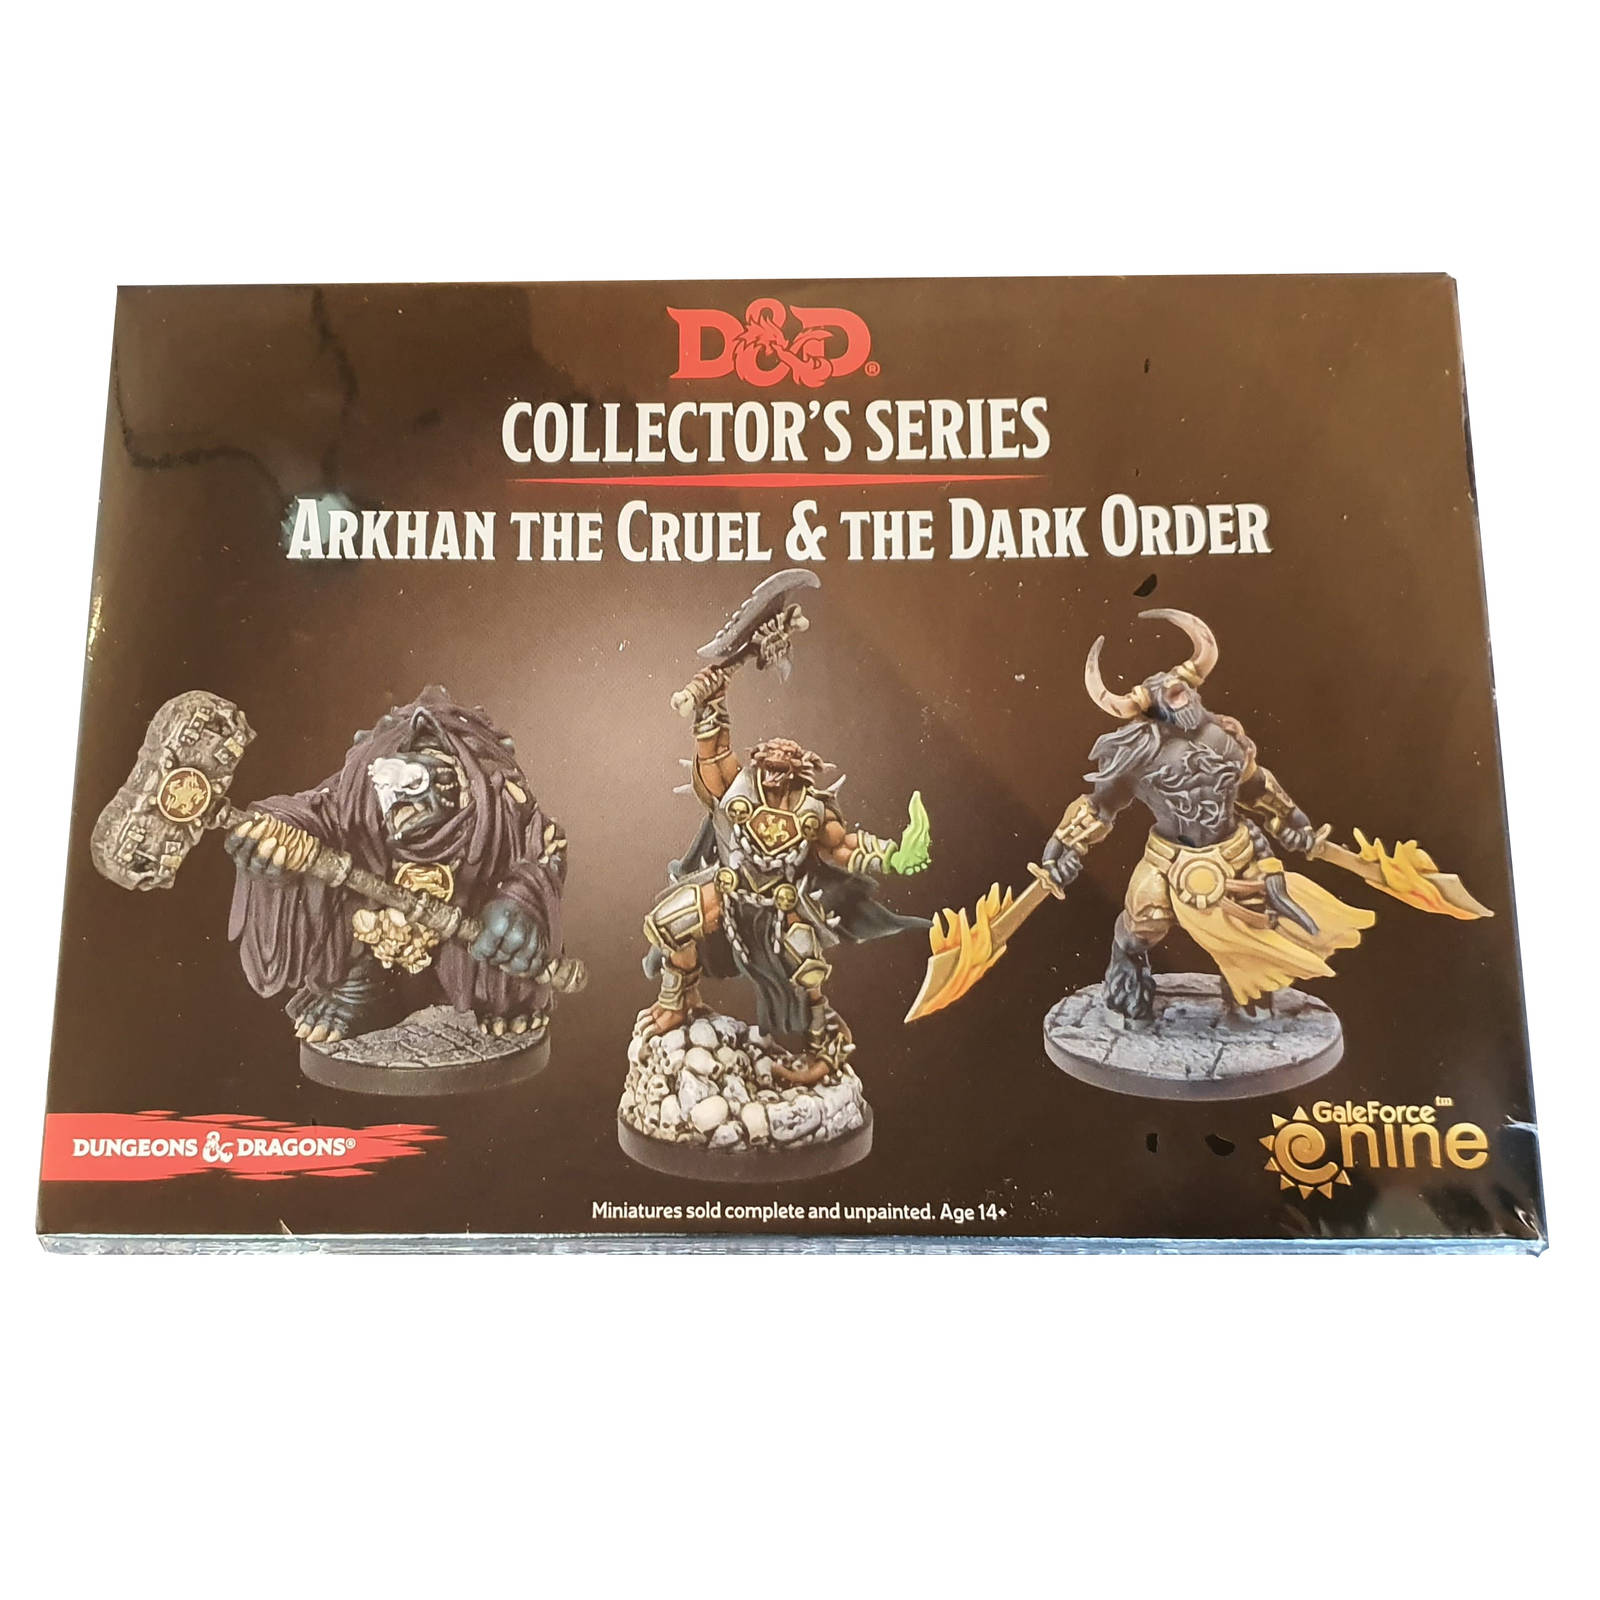 Dungeons & Dragons Collectors Series Arkhan The Cruel & The Dark Order